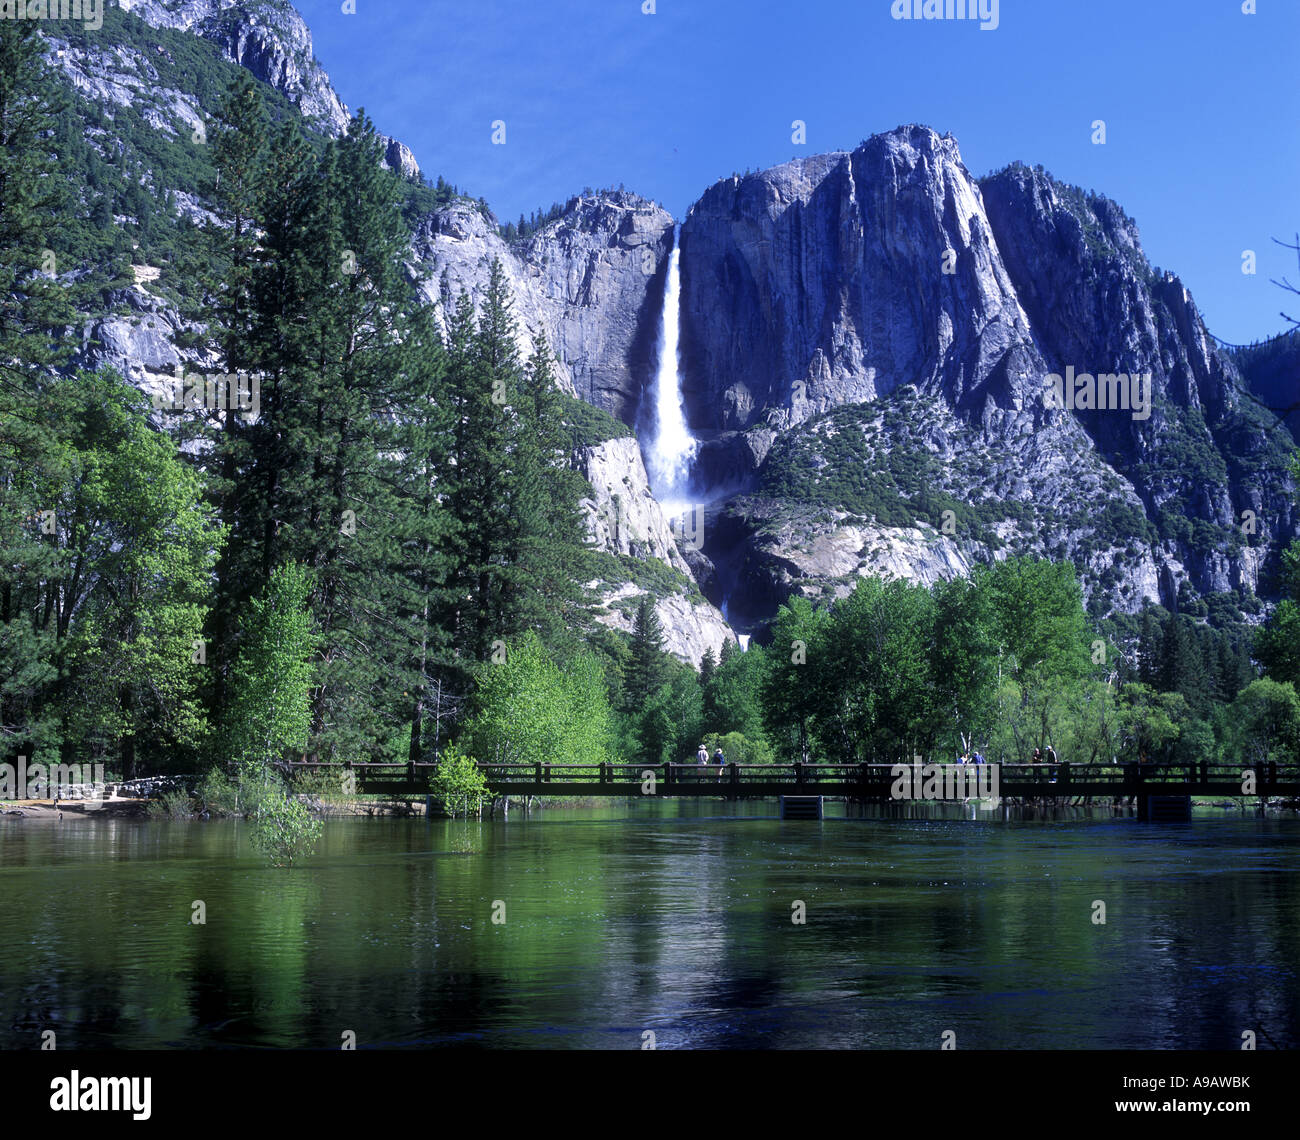 List 90+ Pictures Download Photos For Yosemite Full HD, 2k, 4k